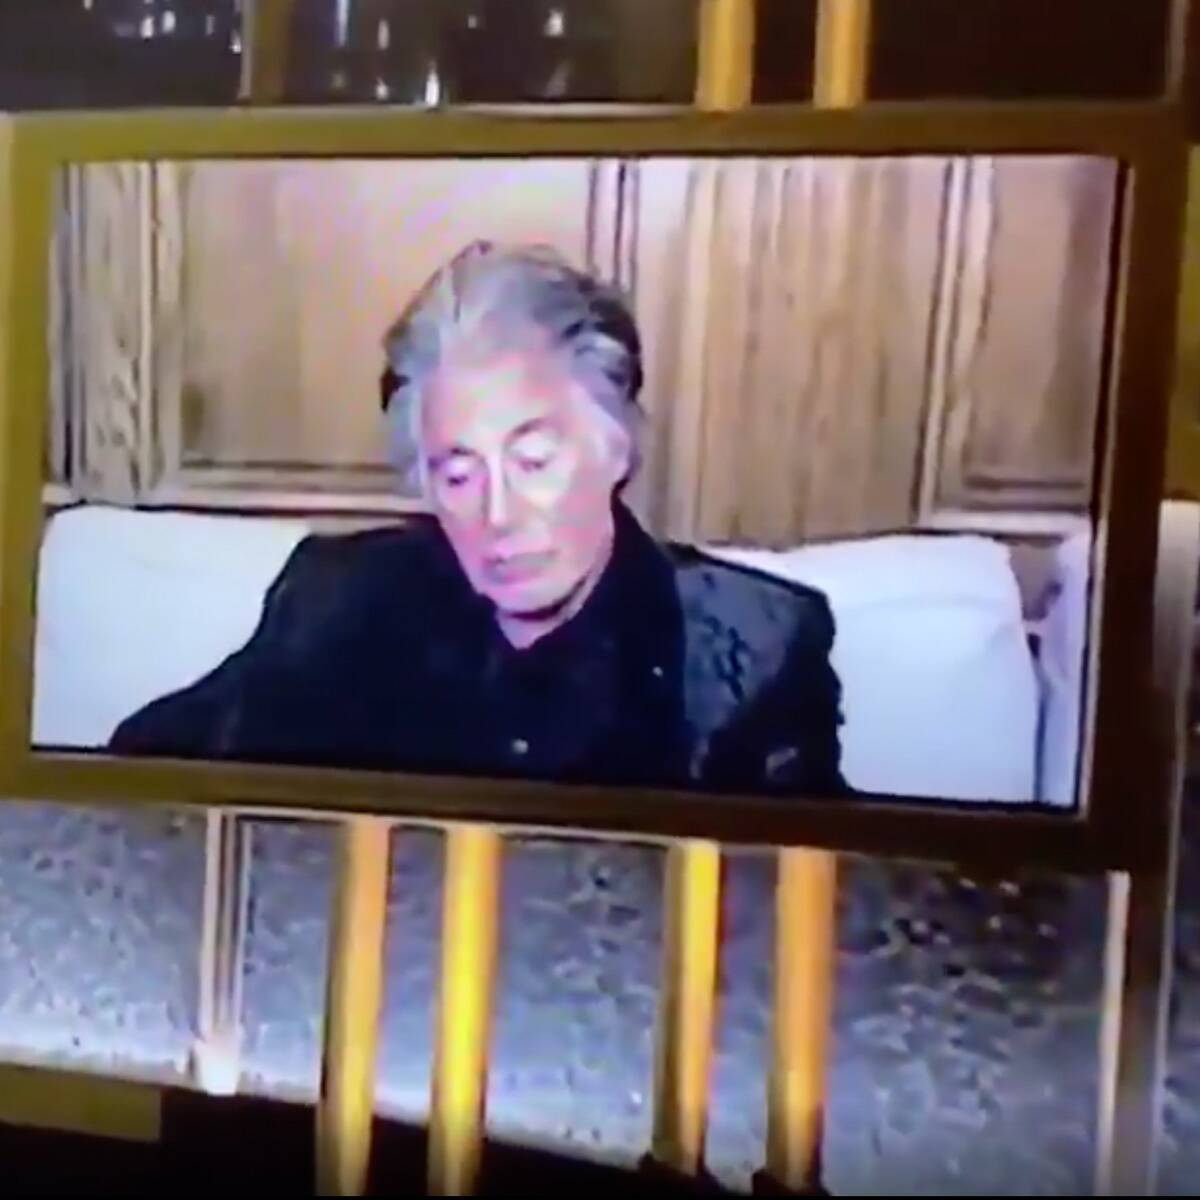 Did the Globes Cameras Catch Al Pacino Taking a Nap? You Decide